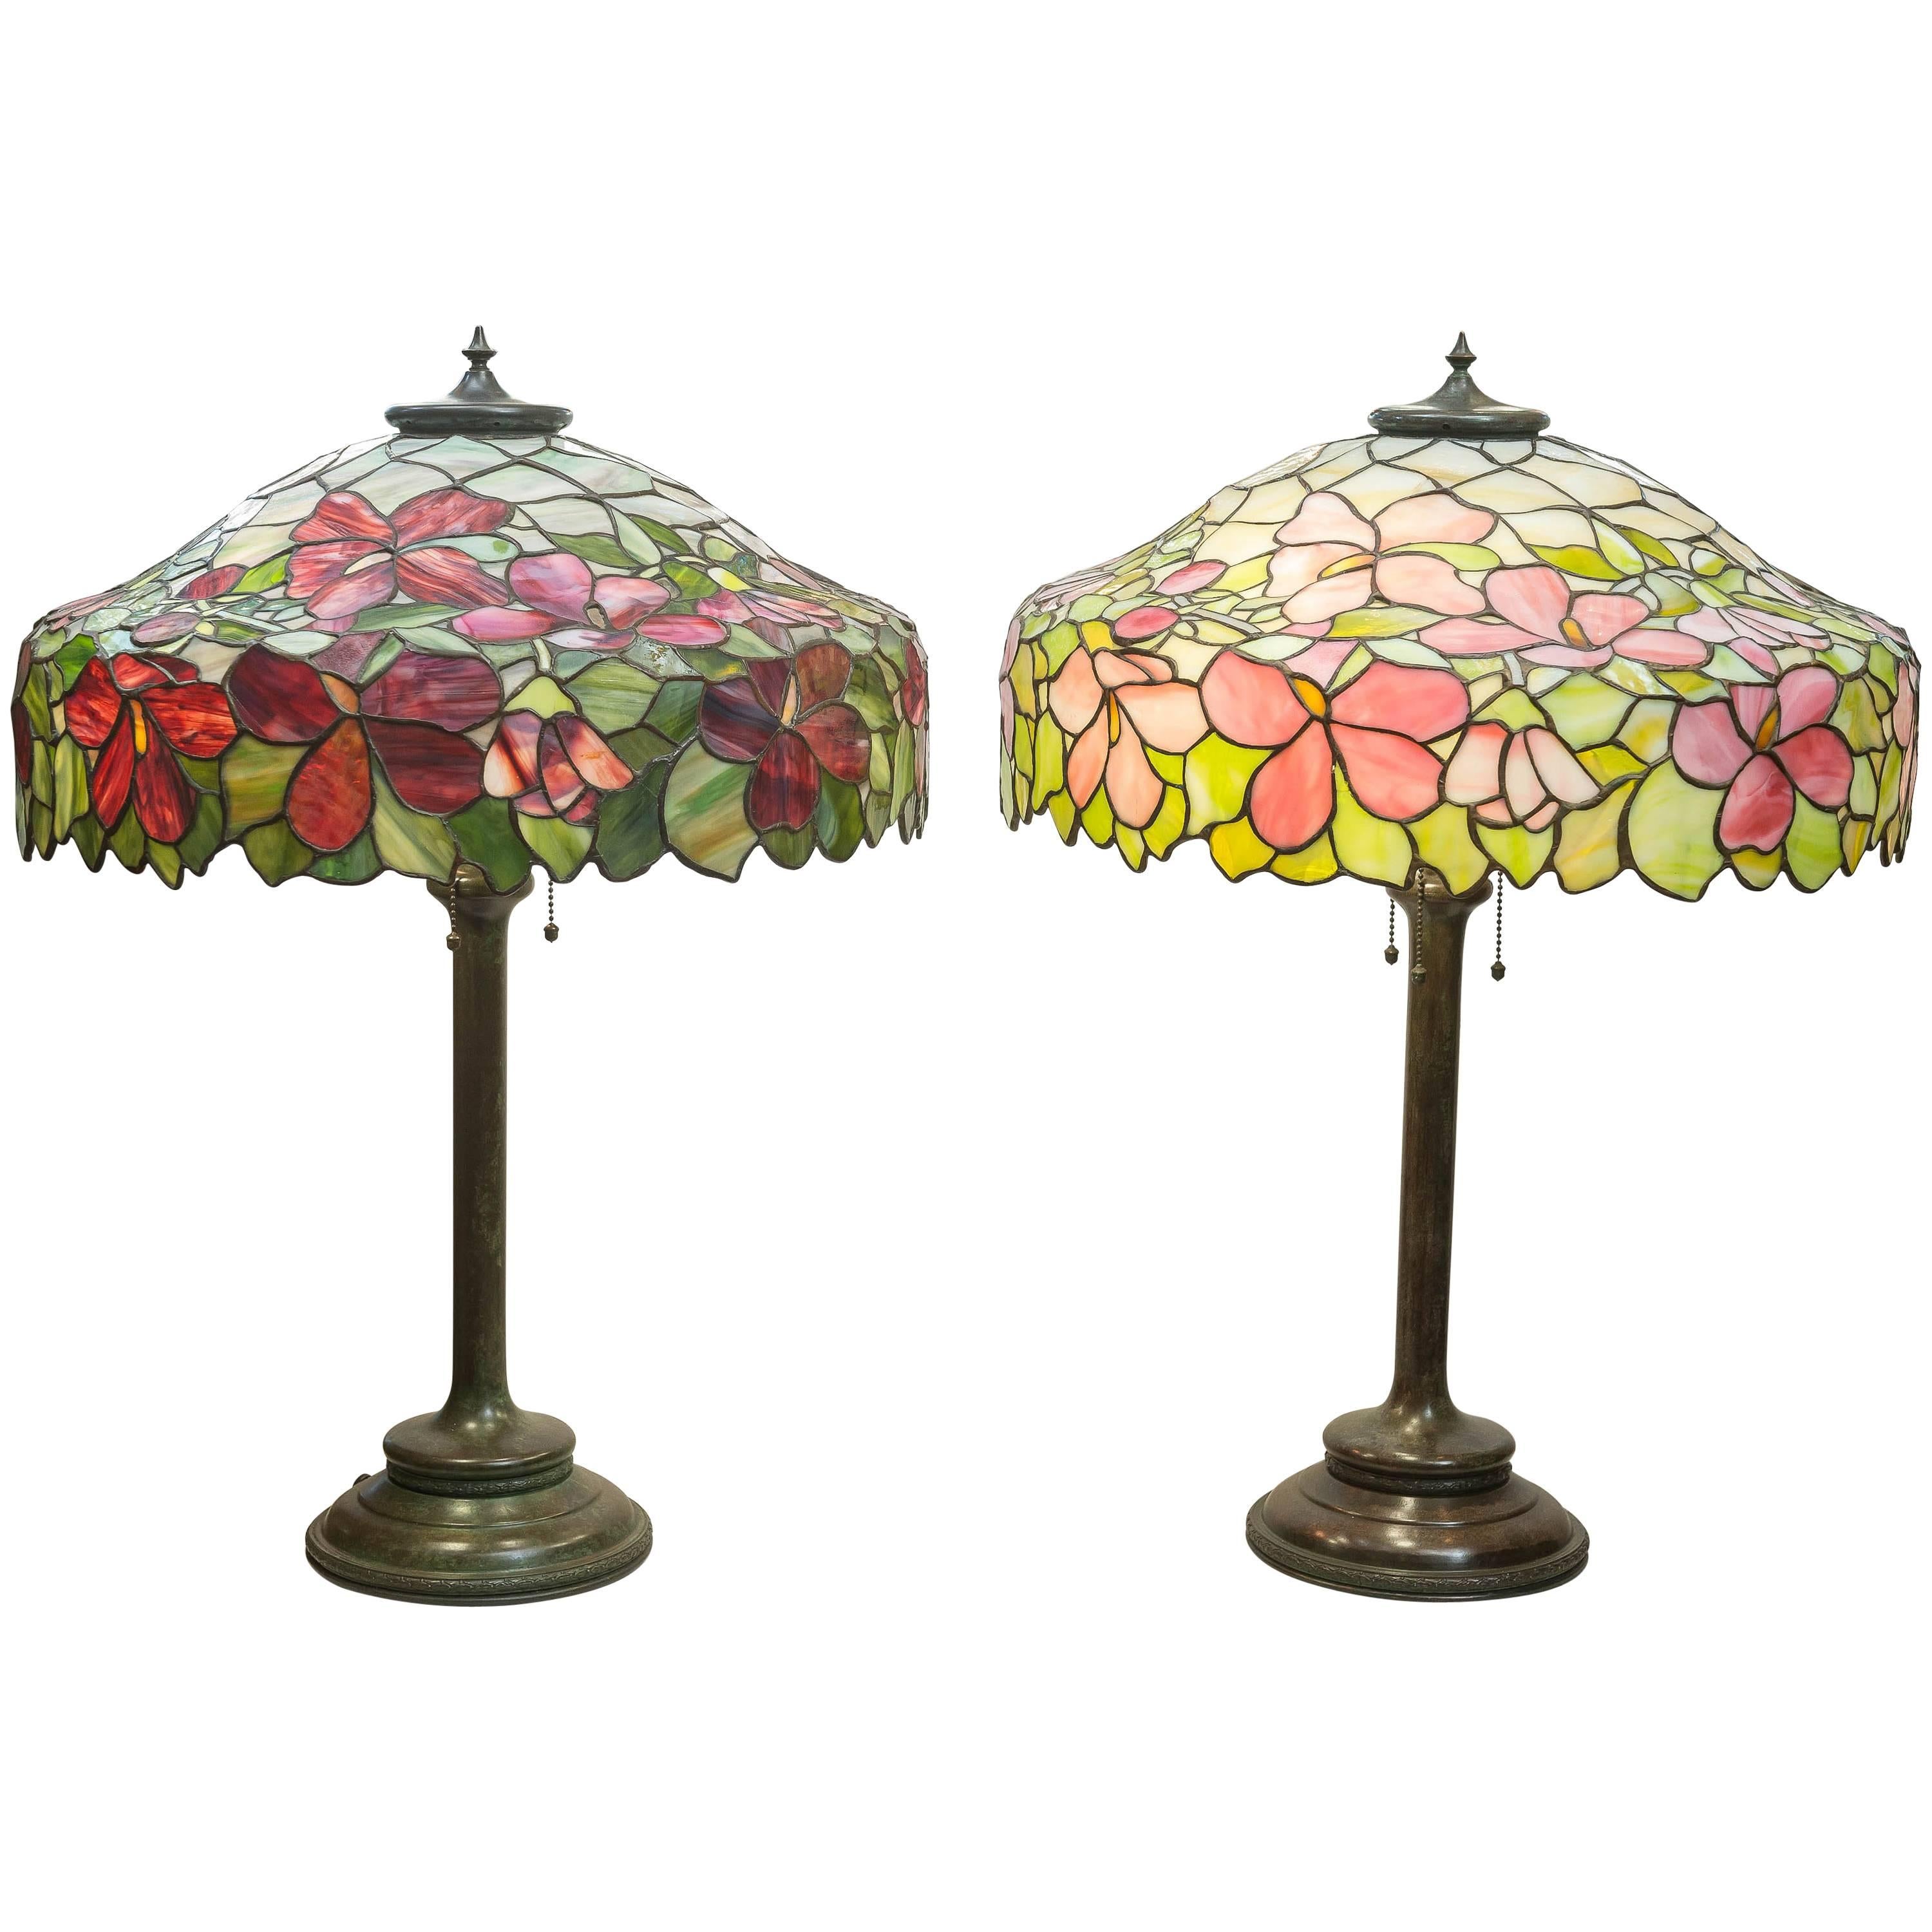 Pair of Leaded Glass Table Lamps by the Unique Art Glass Co.